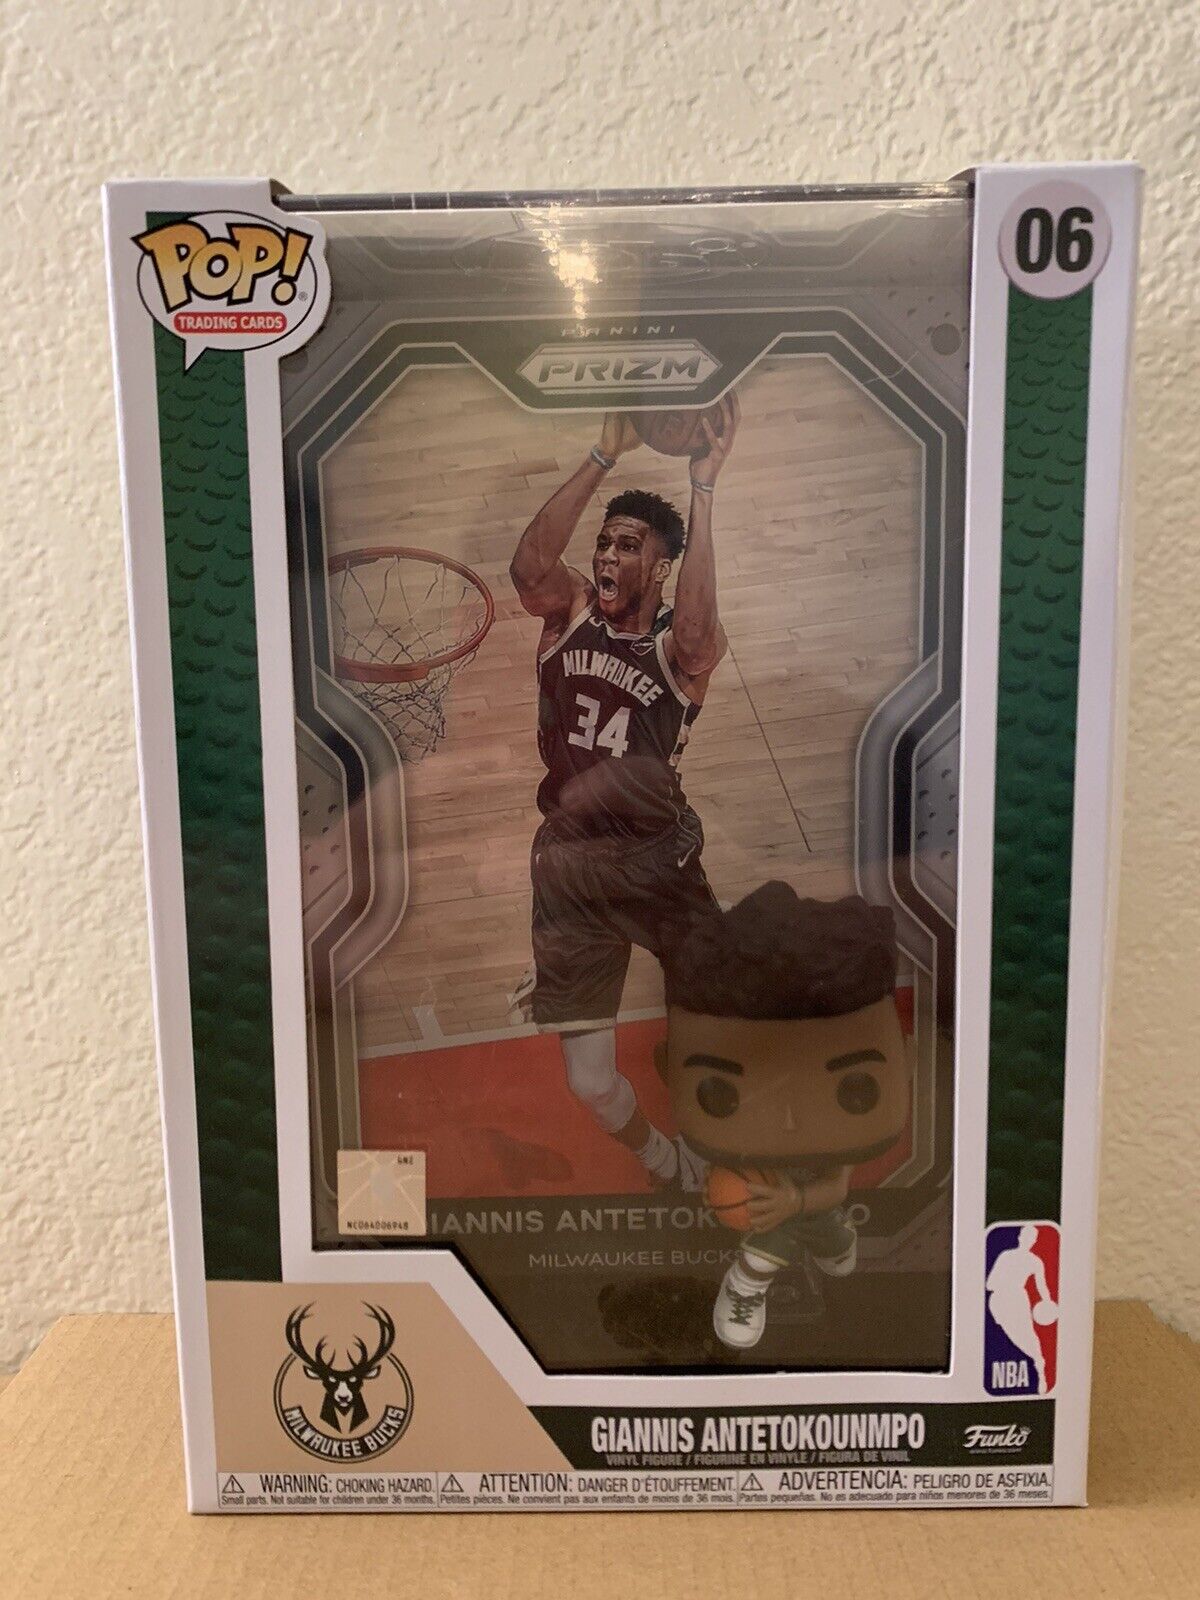 NEW Funko Pop NBA Covers Trading Cards: Giannis Antetokounmpo #06 Collectible